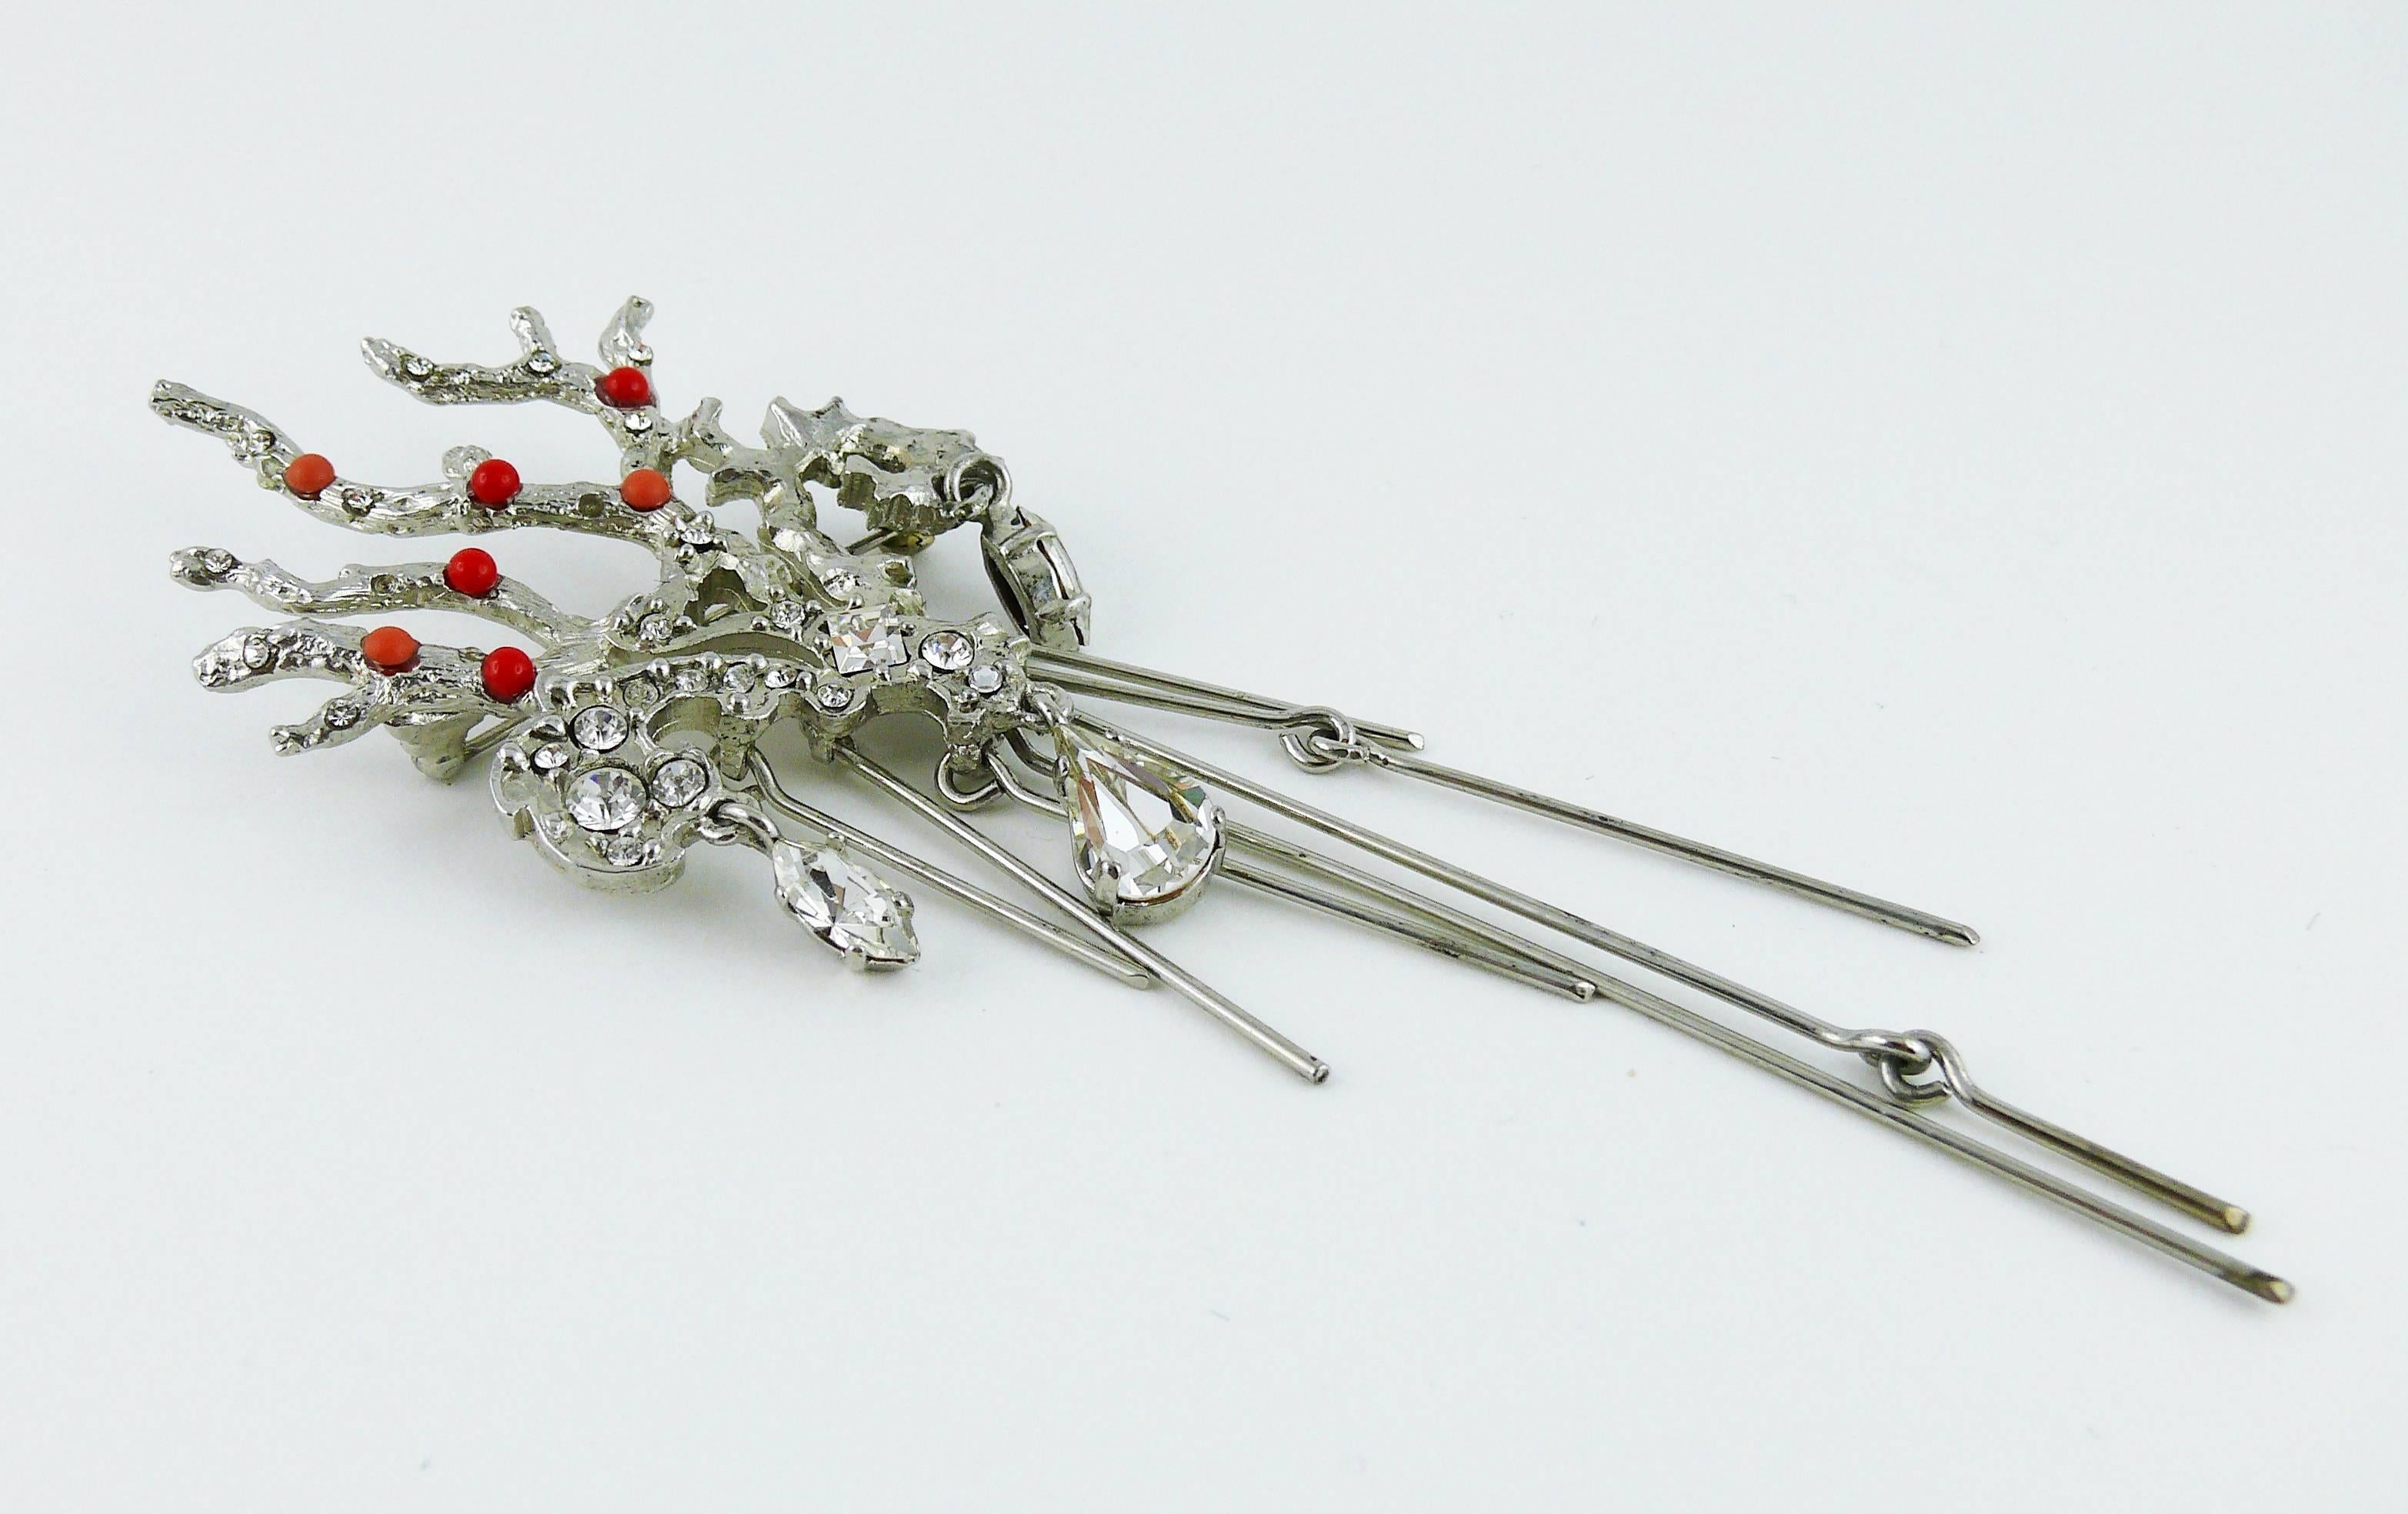 CHRISTIAN LACROIX vintage silver toned coral branch design brooch embellished with red and peach color resin cabochons and clear crystals.

Marked CHRISTIAN LACROIX CL Made in France.

Indicative measurements : total length approx. 13.5 cm (5.31